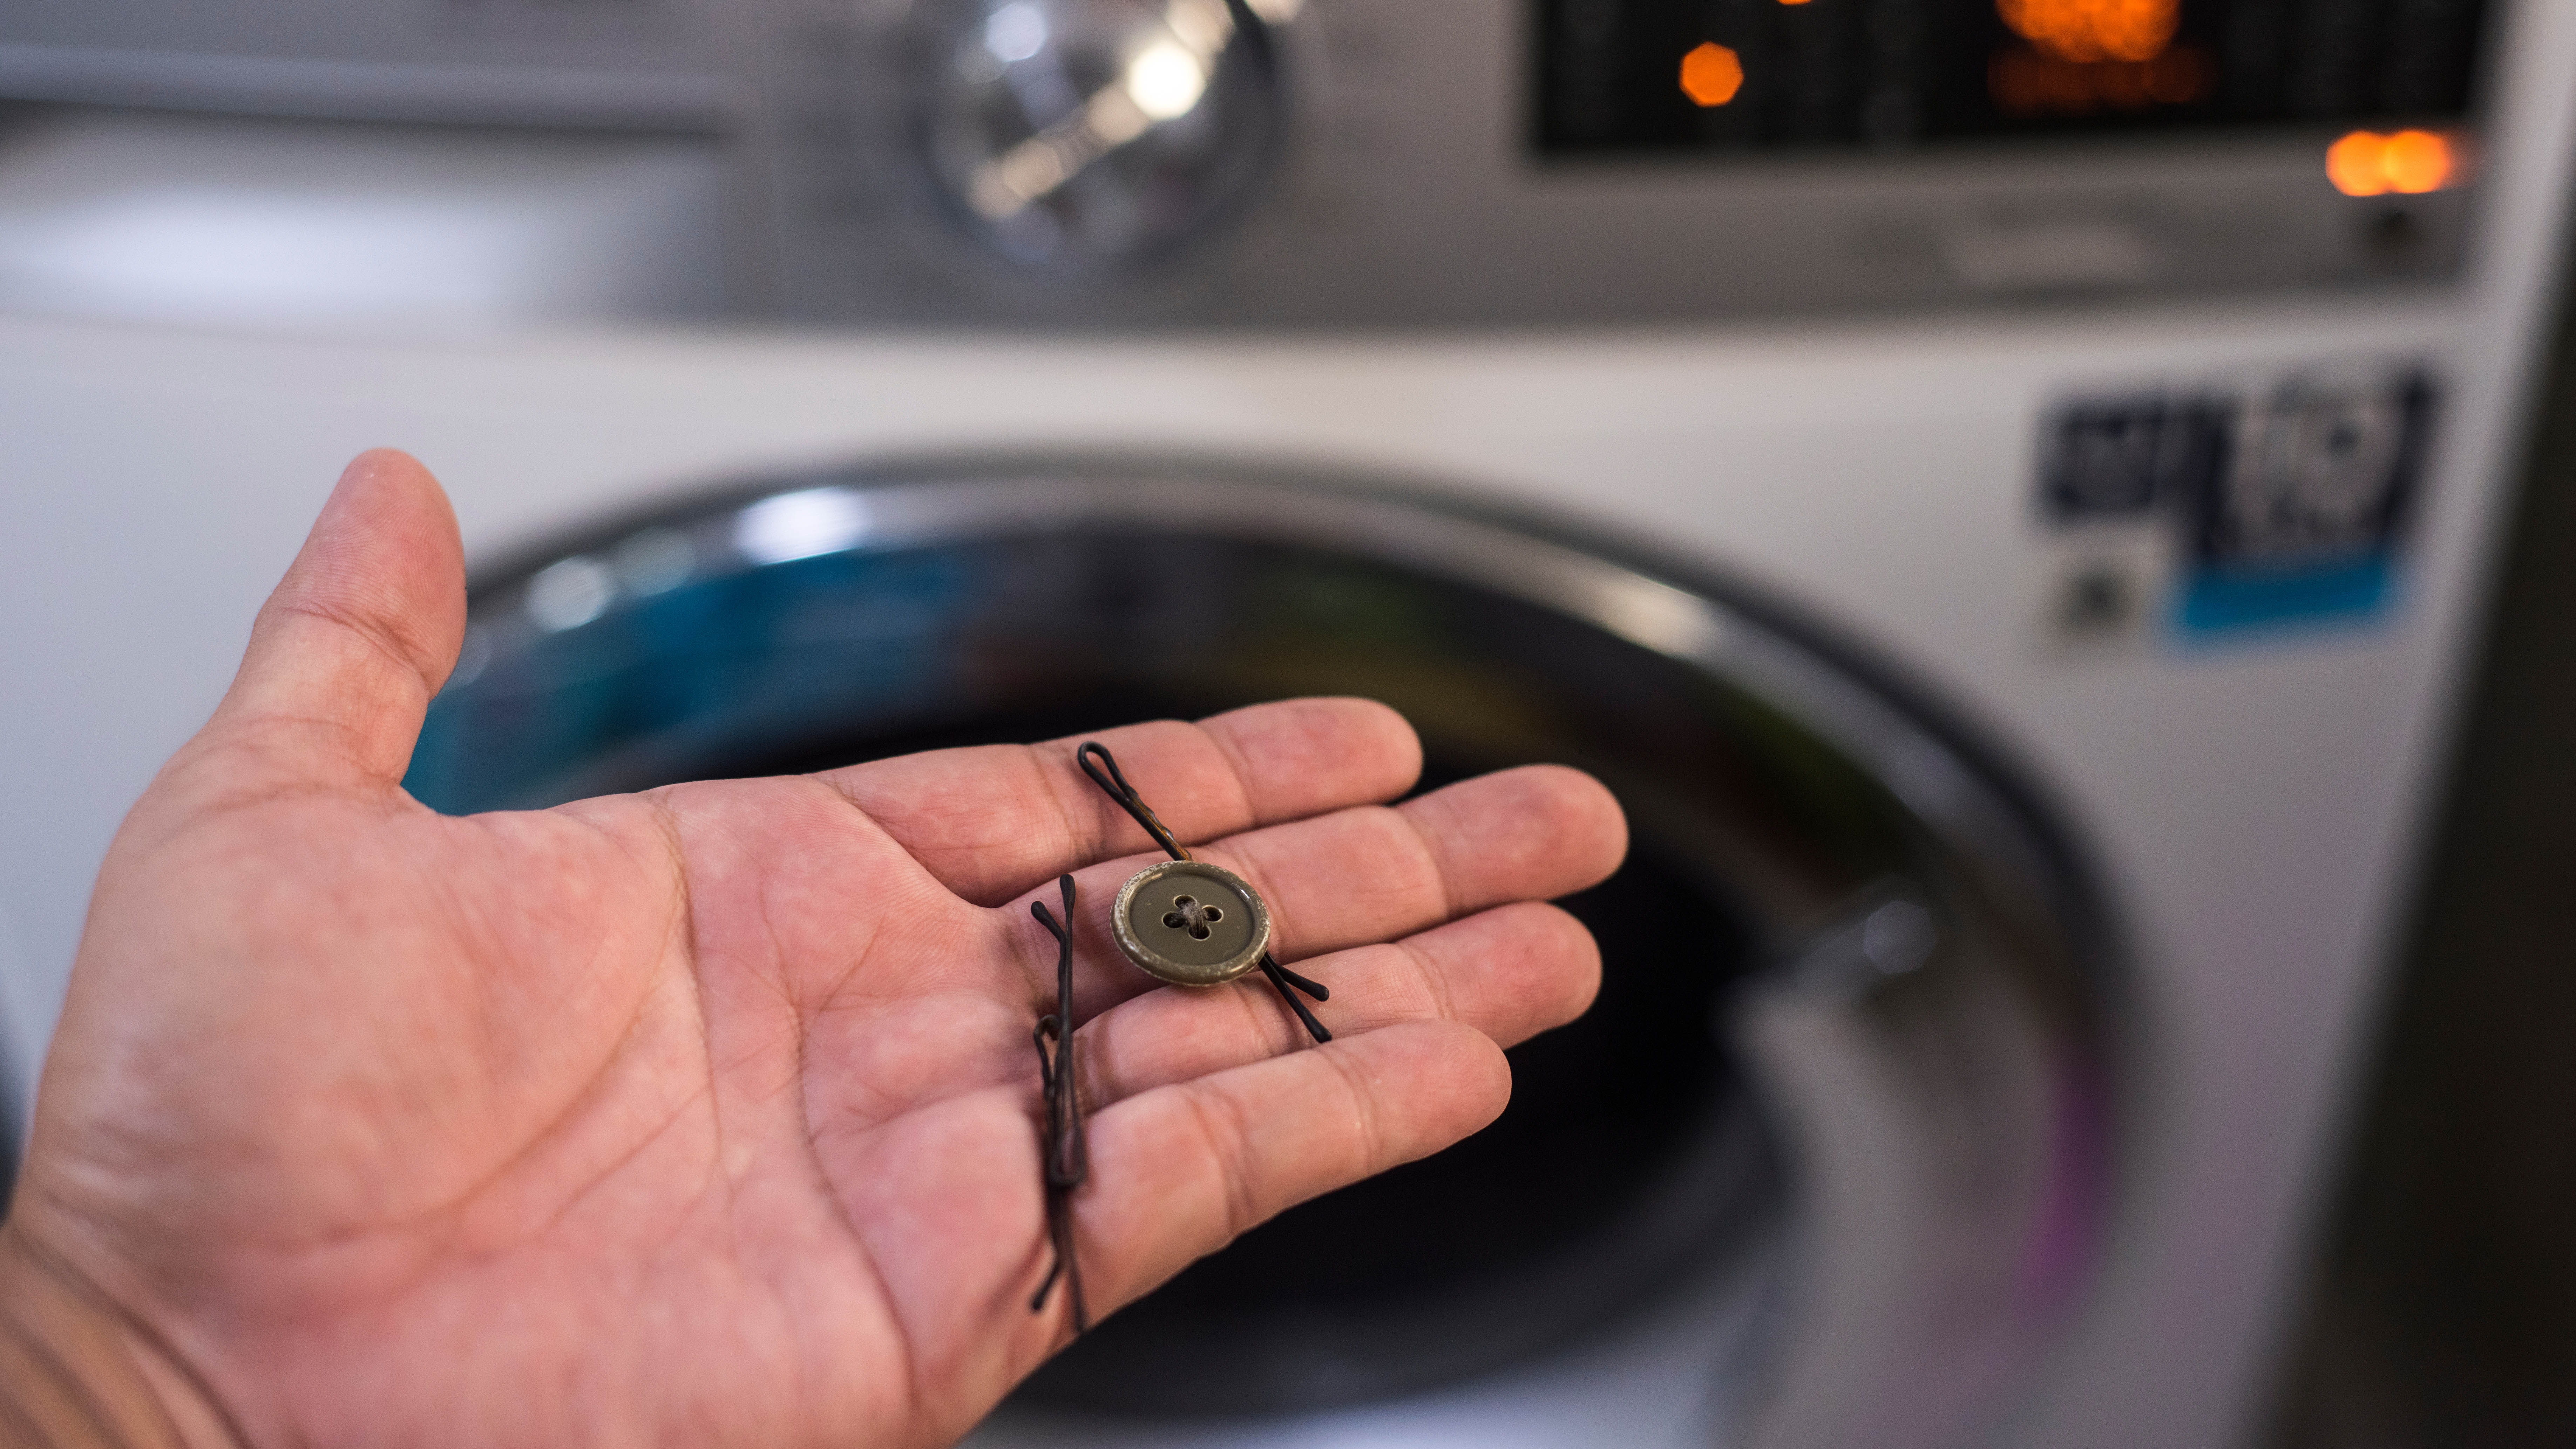 Someone holding hair clips and a button in front of a washer